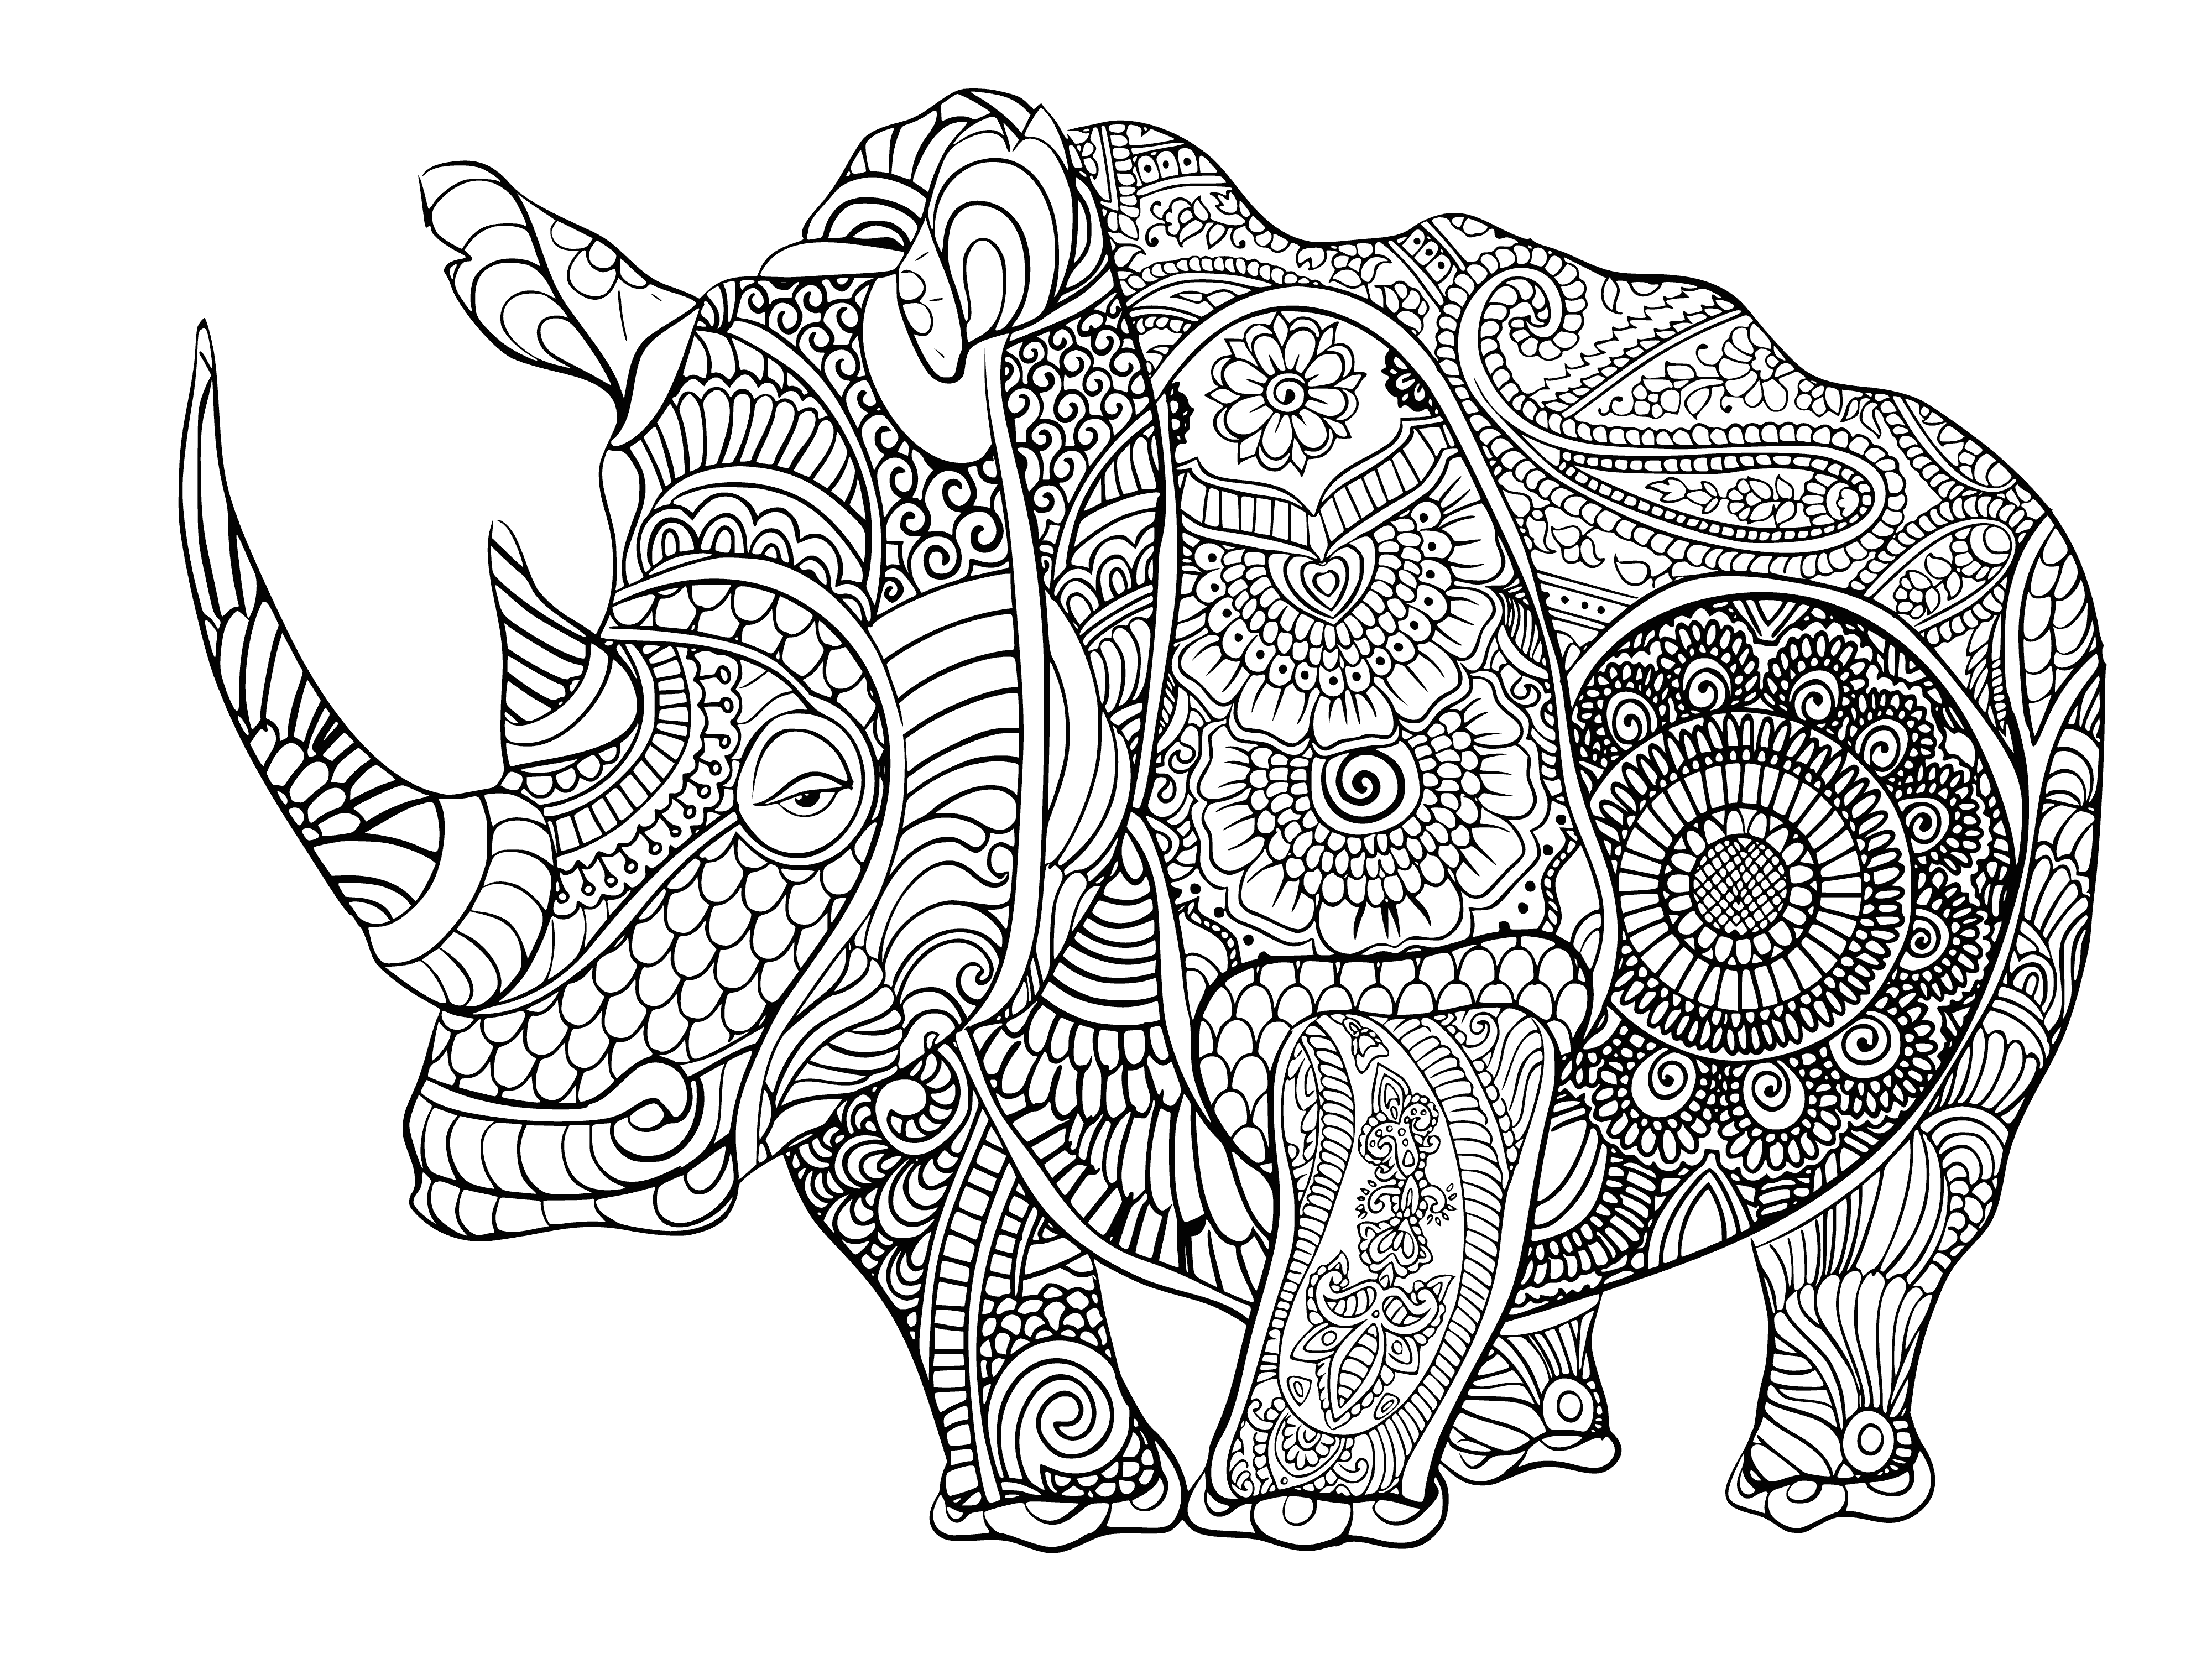 coloring page: Coloring page of a Rhino for relaxation and destressing - perfect for animal lovers! #coloring #animal #Rhino